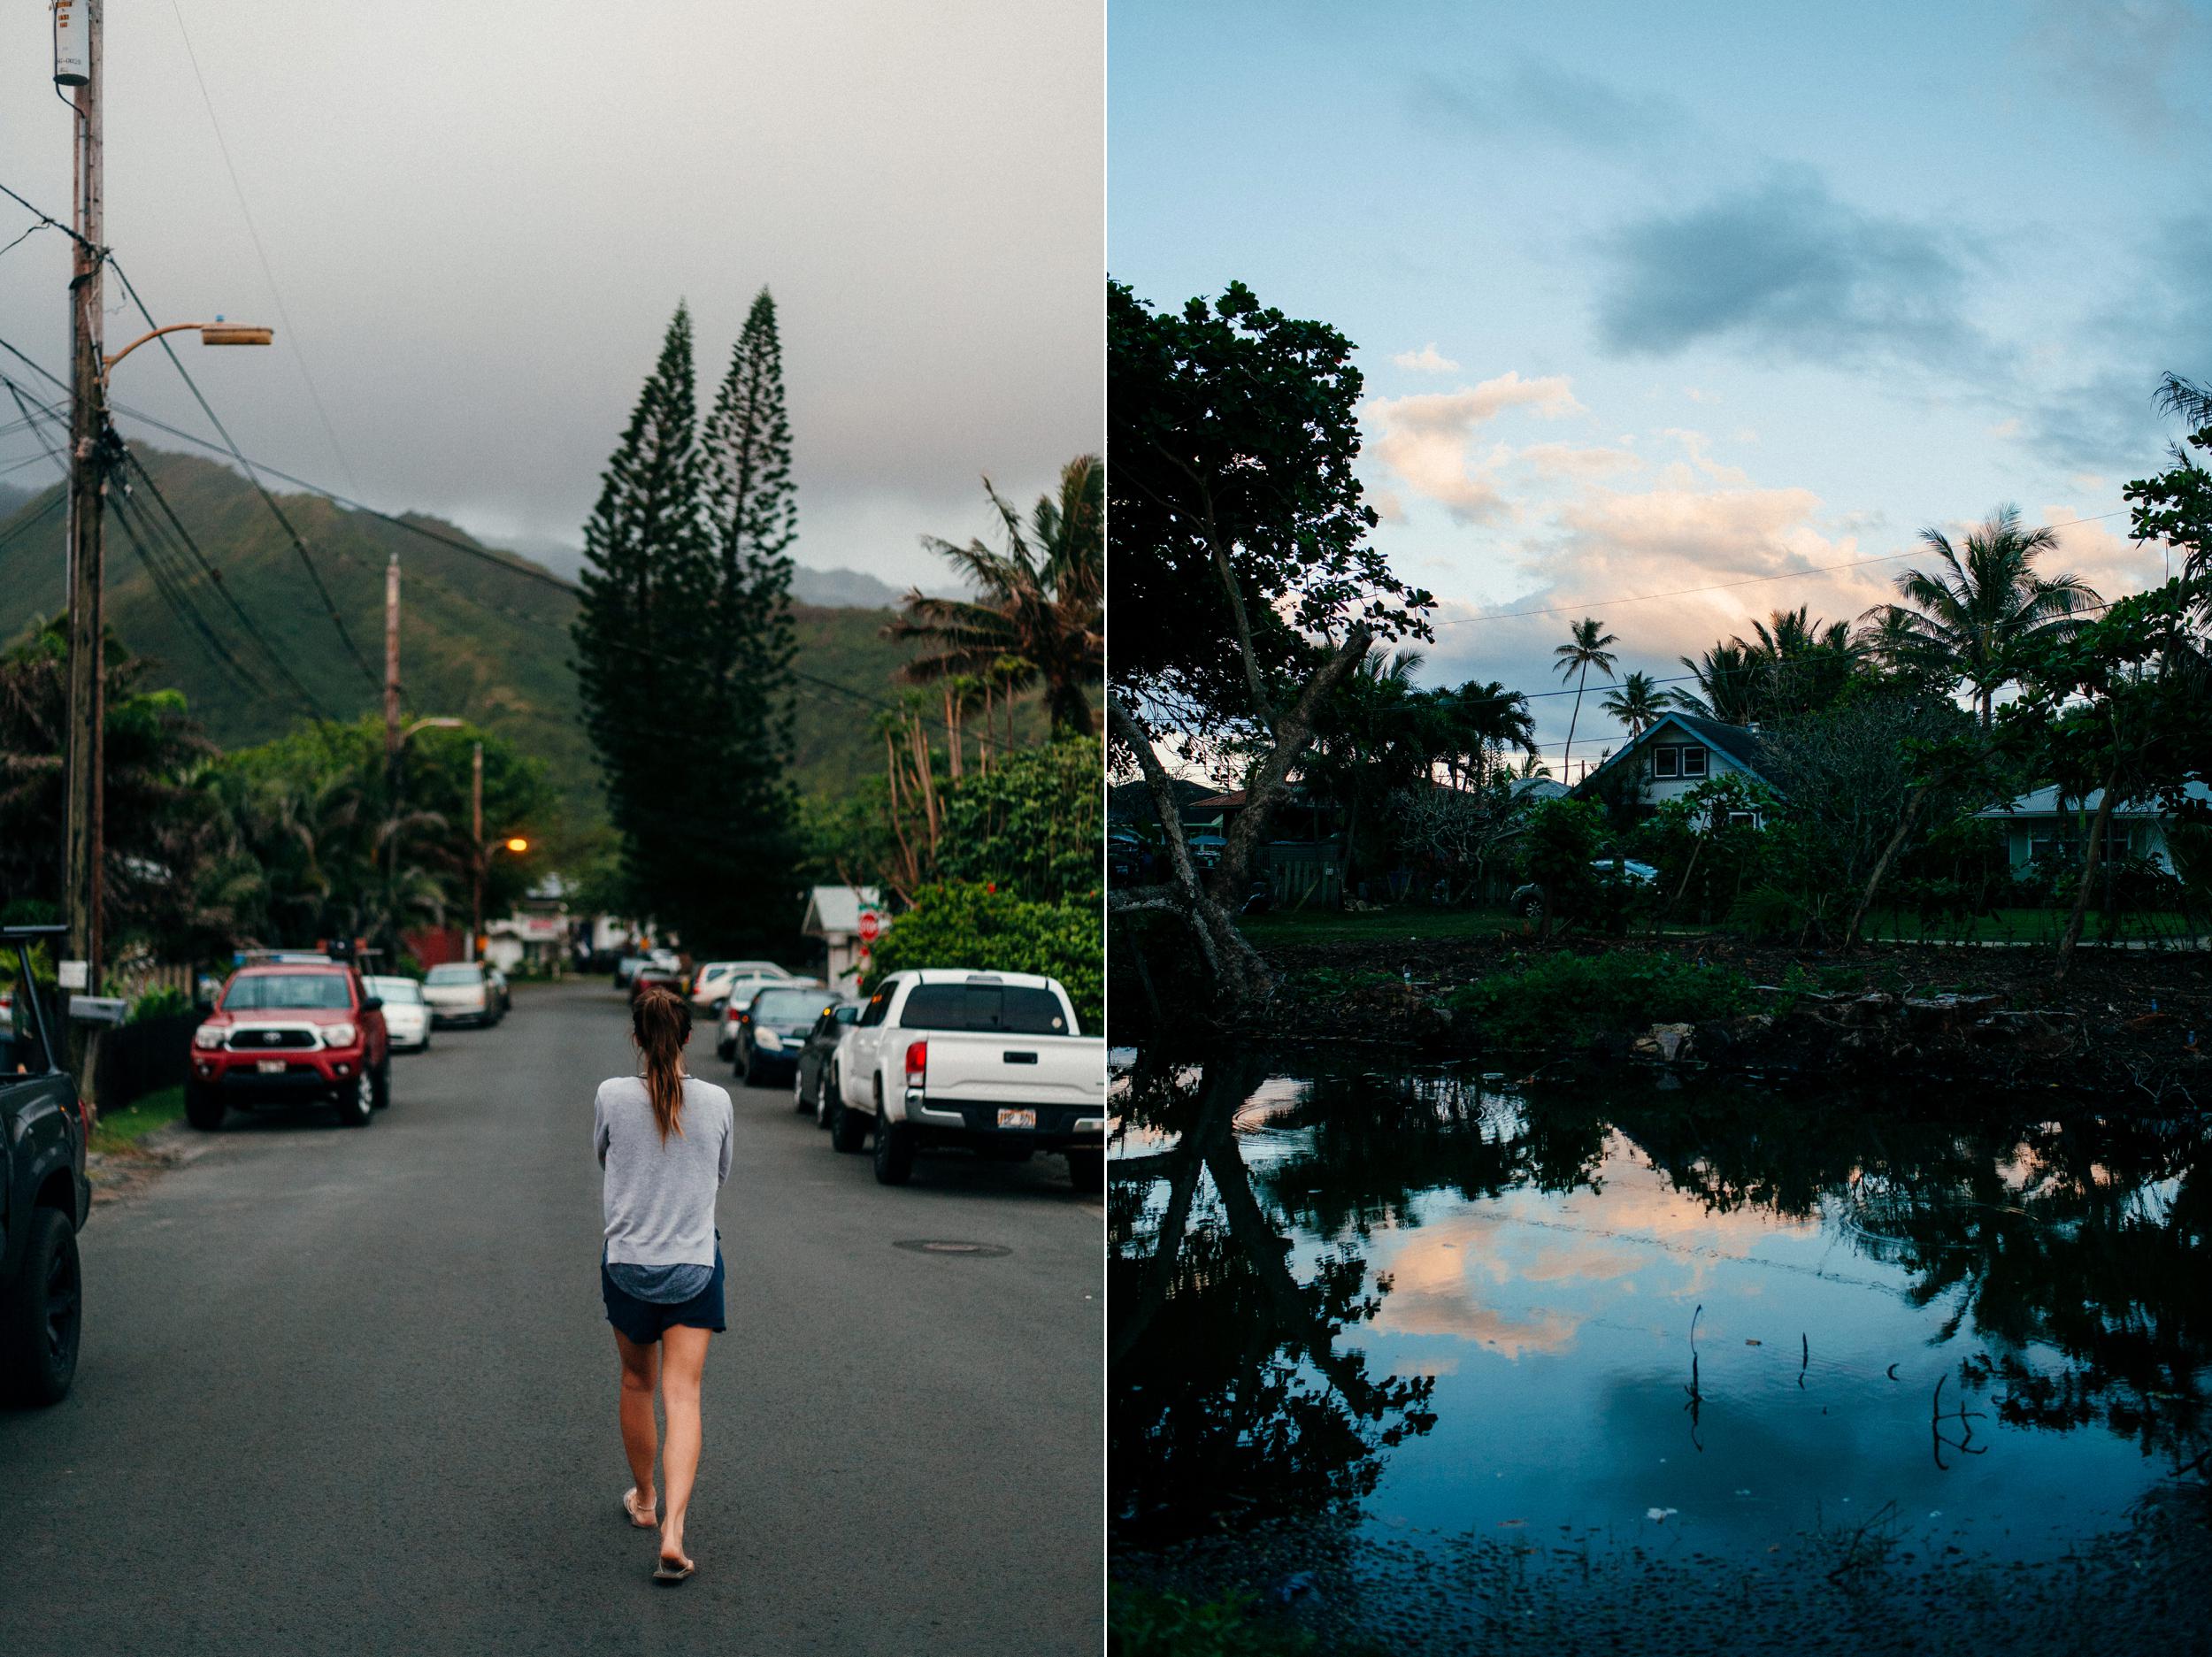  Living Hawai'i Nei - Our Personal Documentary Photographs 